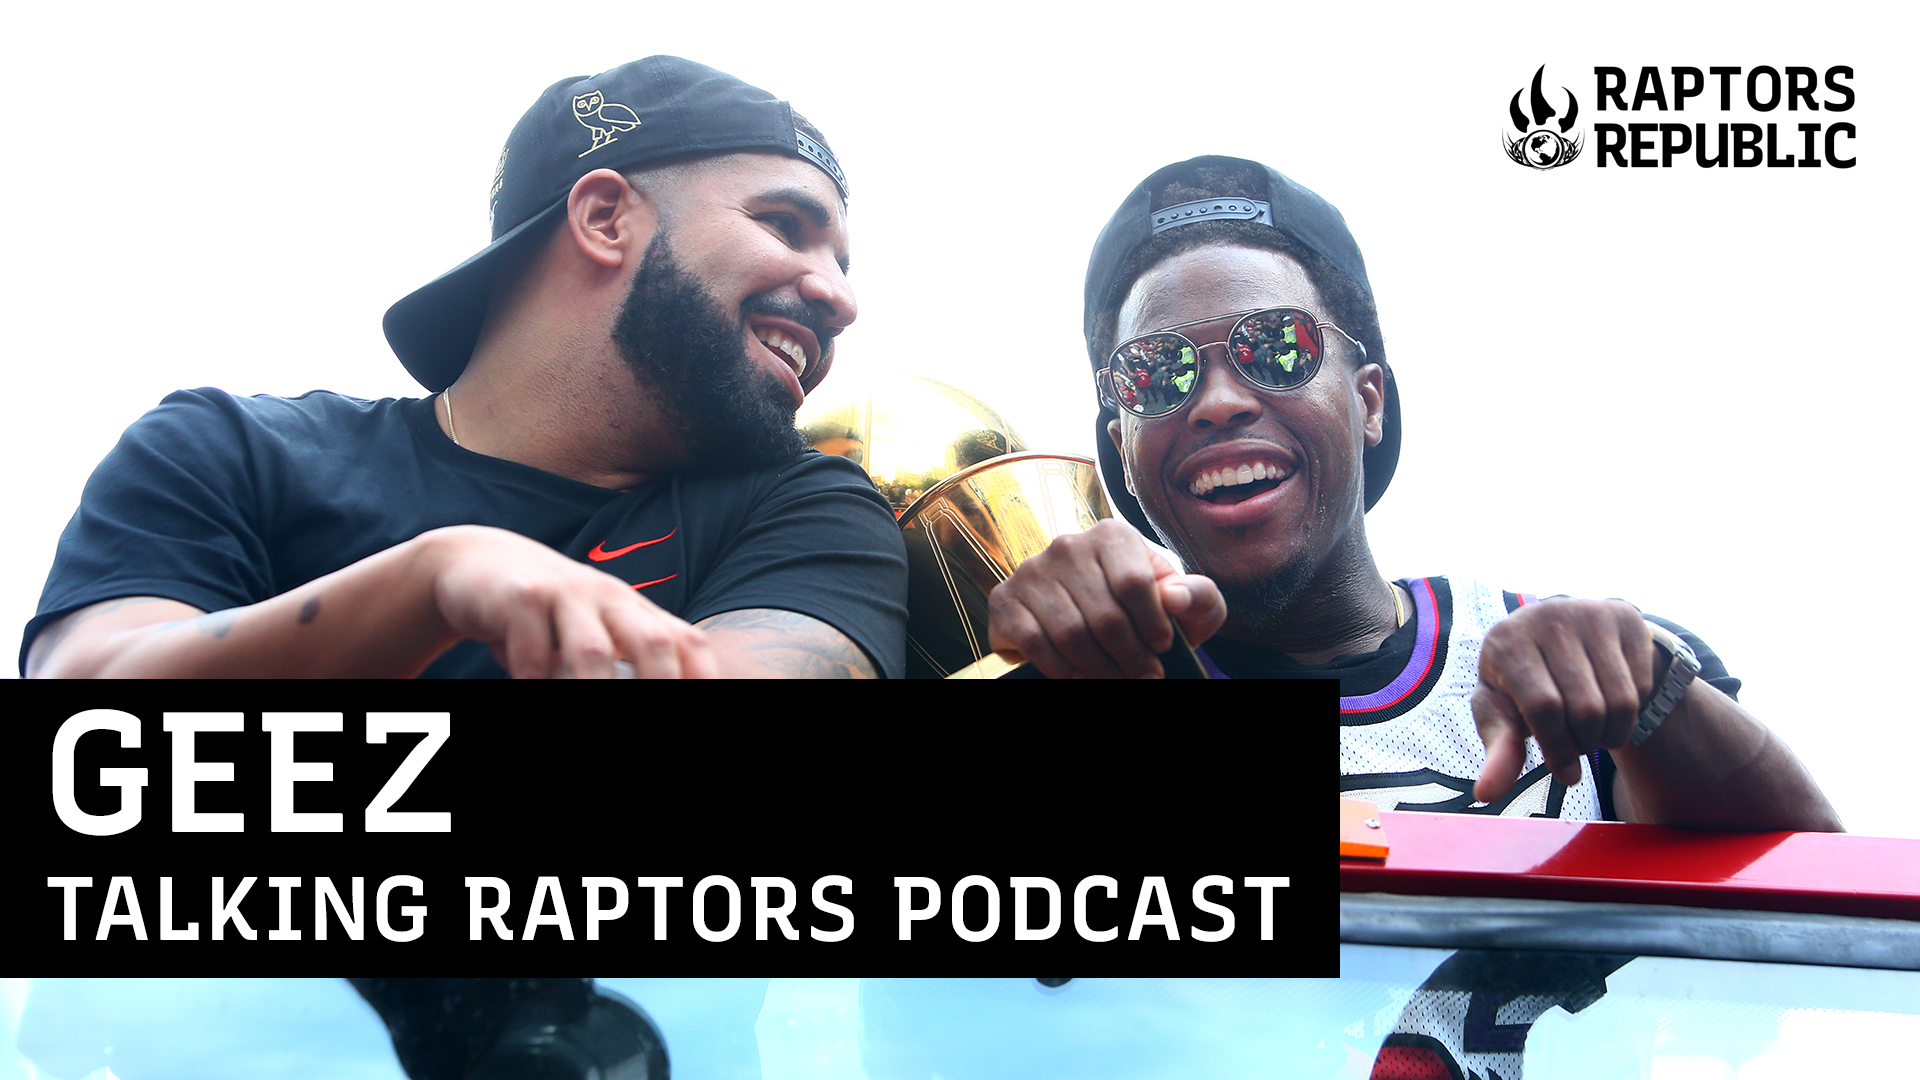 Kyle Lowry and Drake on a Bus - Talking Raptors Podcast on Raptors Republic